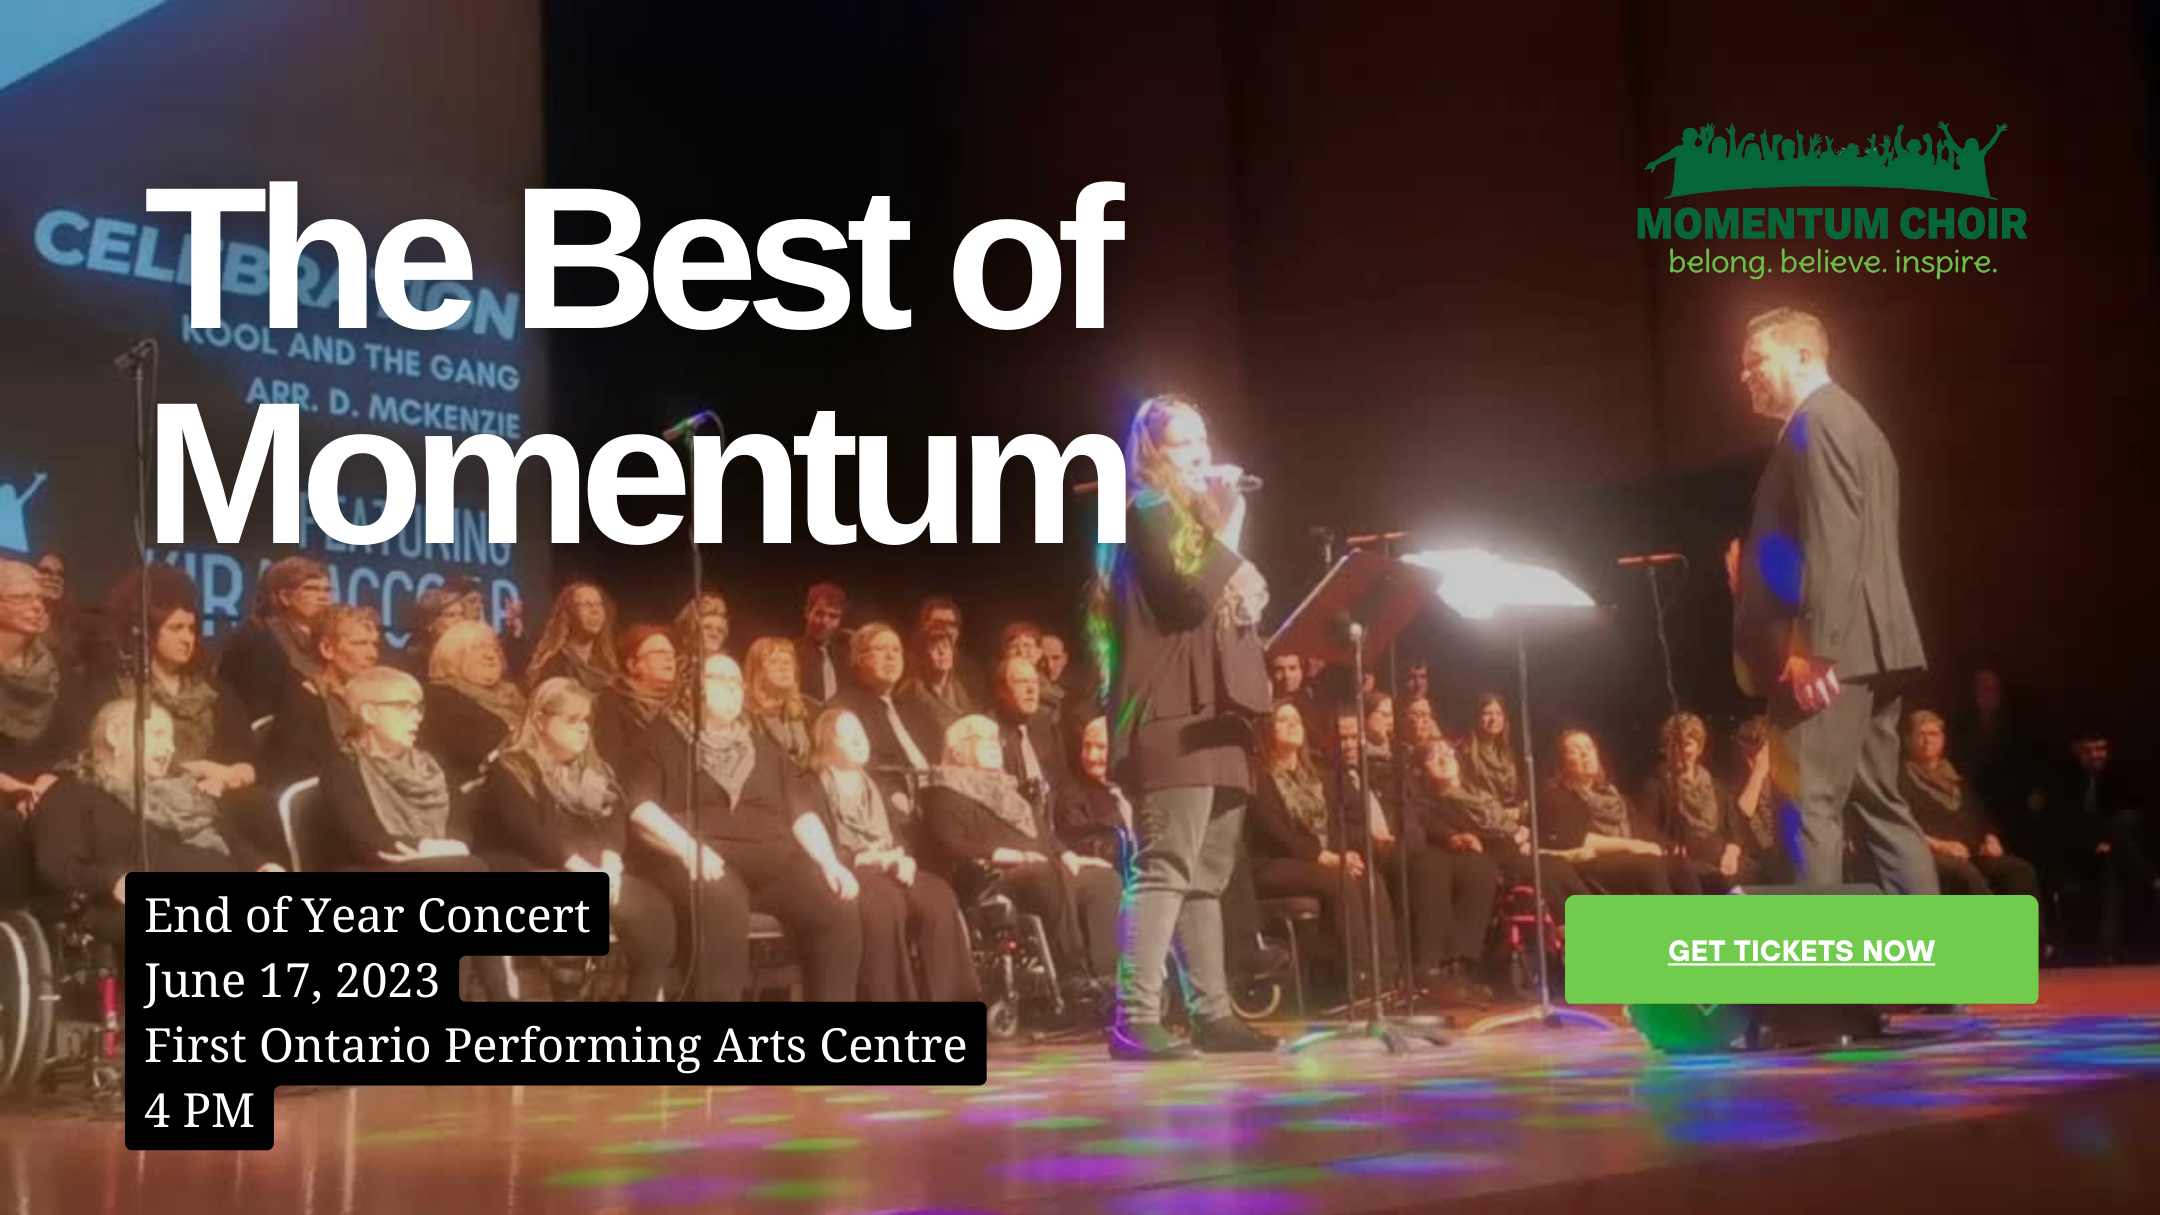 Best of Momentum Concert promo image with title and description of date, time, location